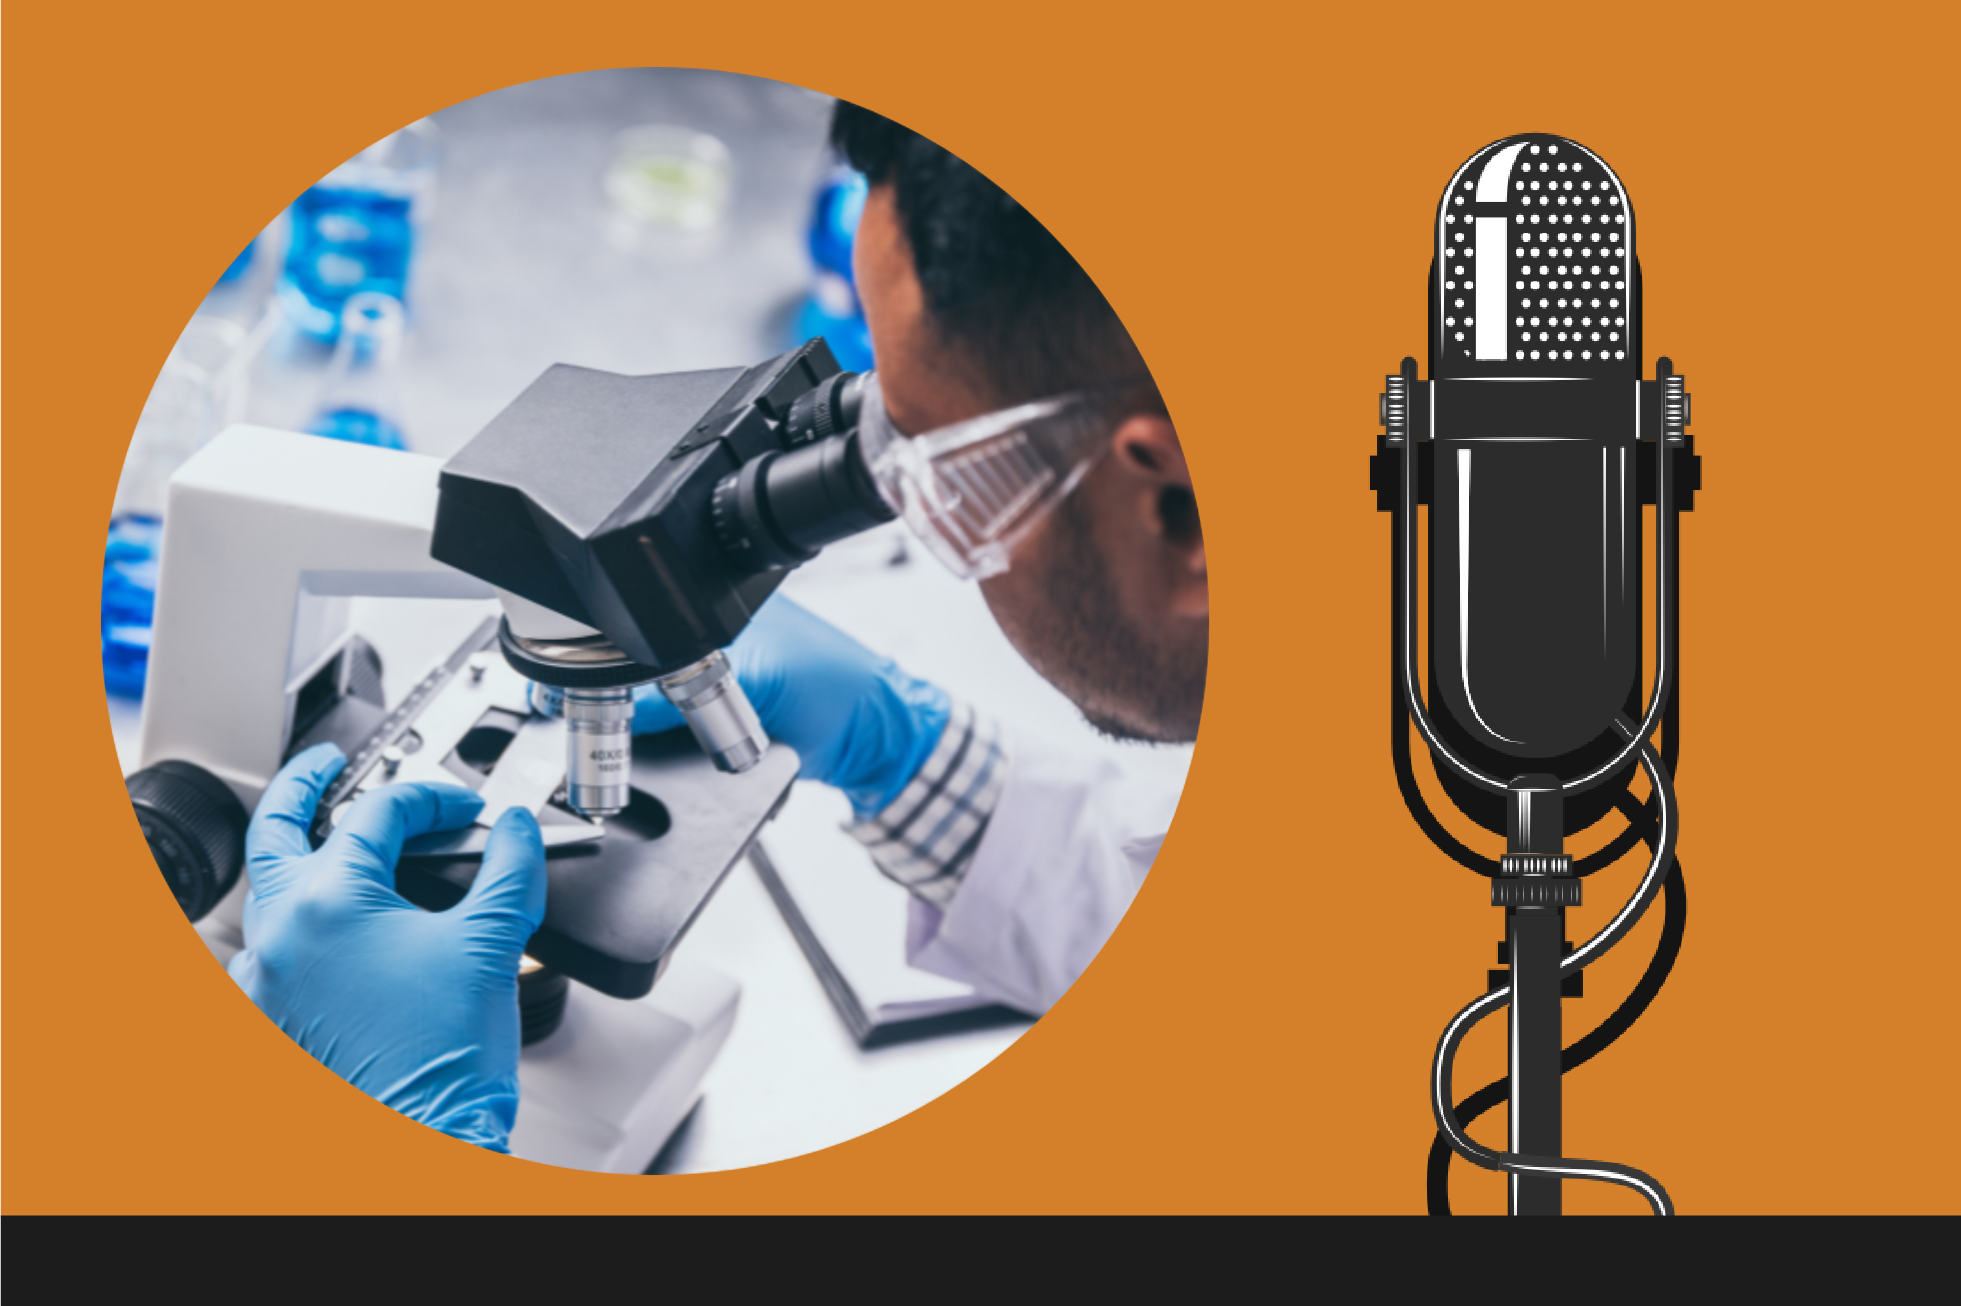 A man peering into a microscope. How to Approach Fundraising When Your Mission Doesn't Fit in a Neat Box [Podcast Episode]